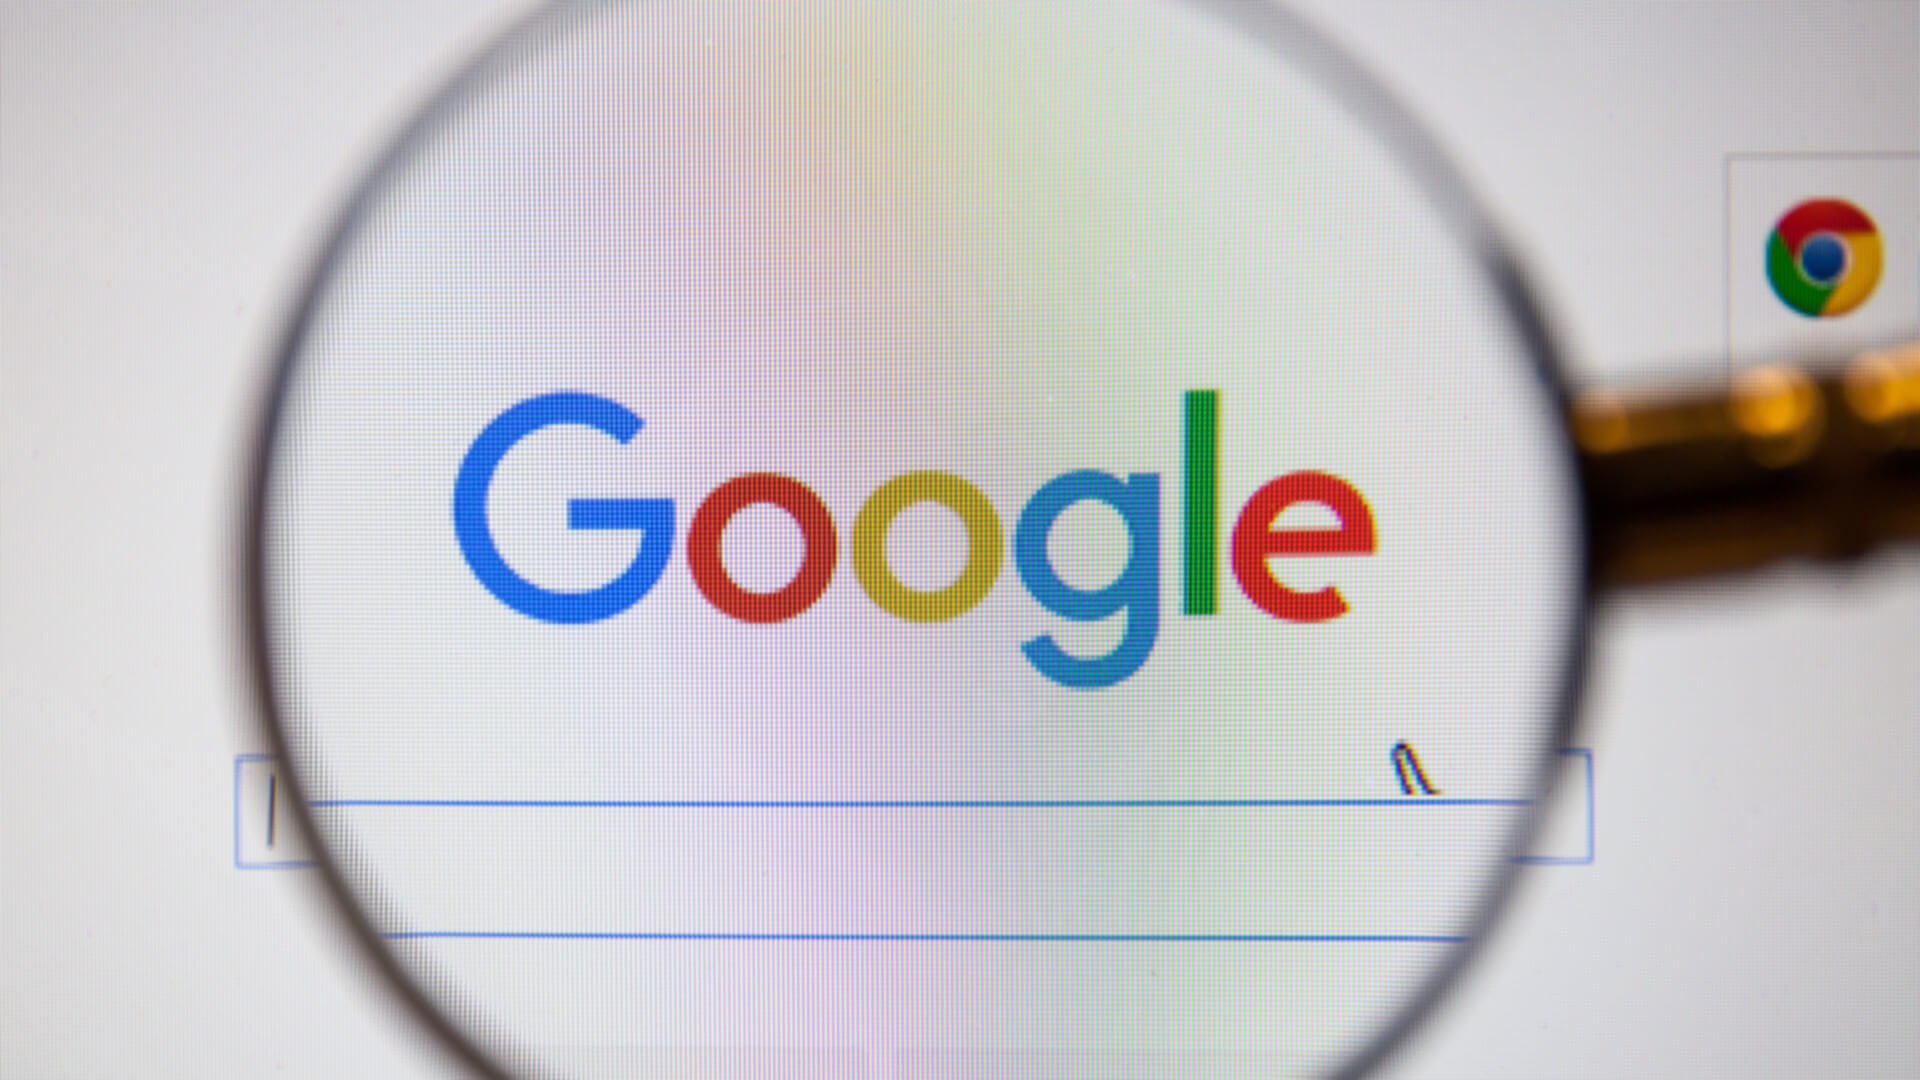 Google search bar in a magnifying glass